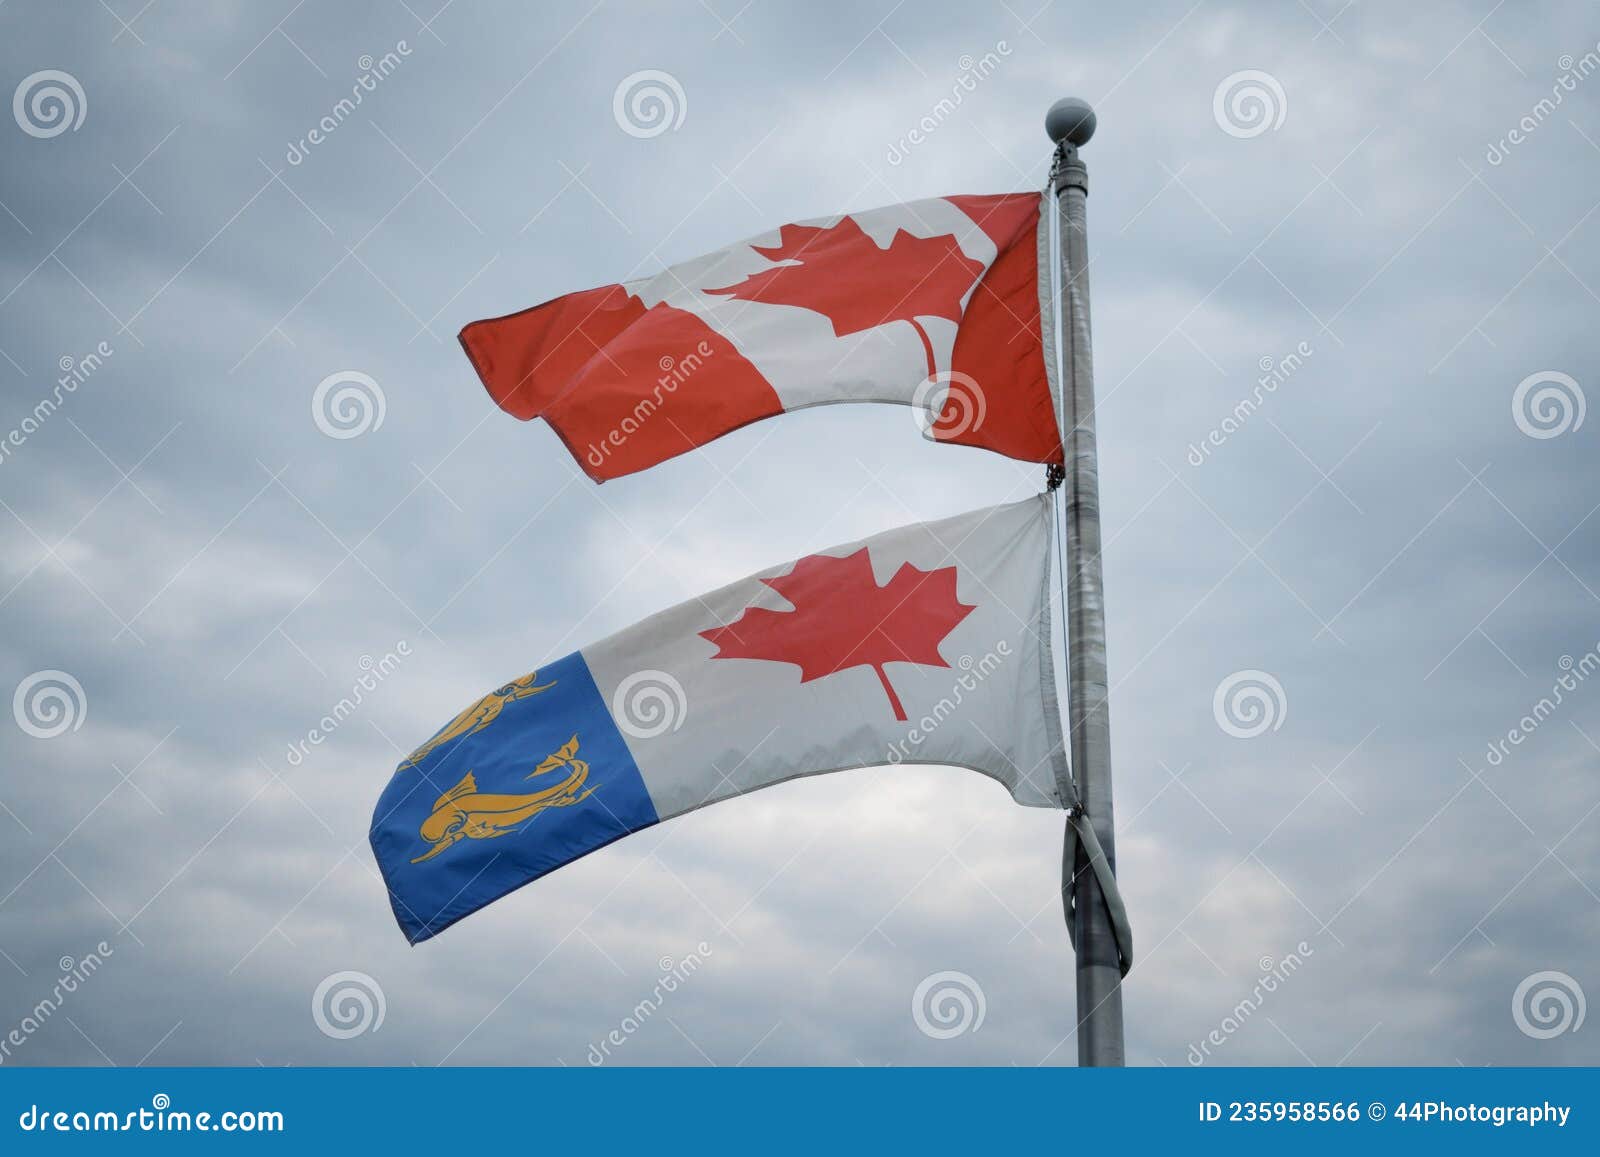 flag of canada, canadian flag and flag of the canadian coast guard.